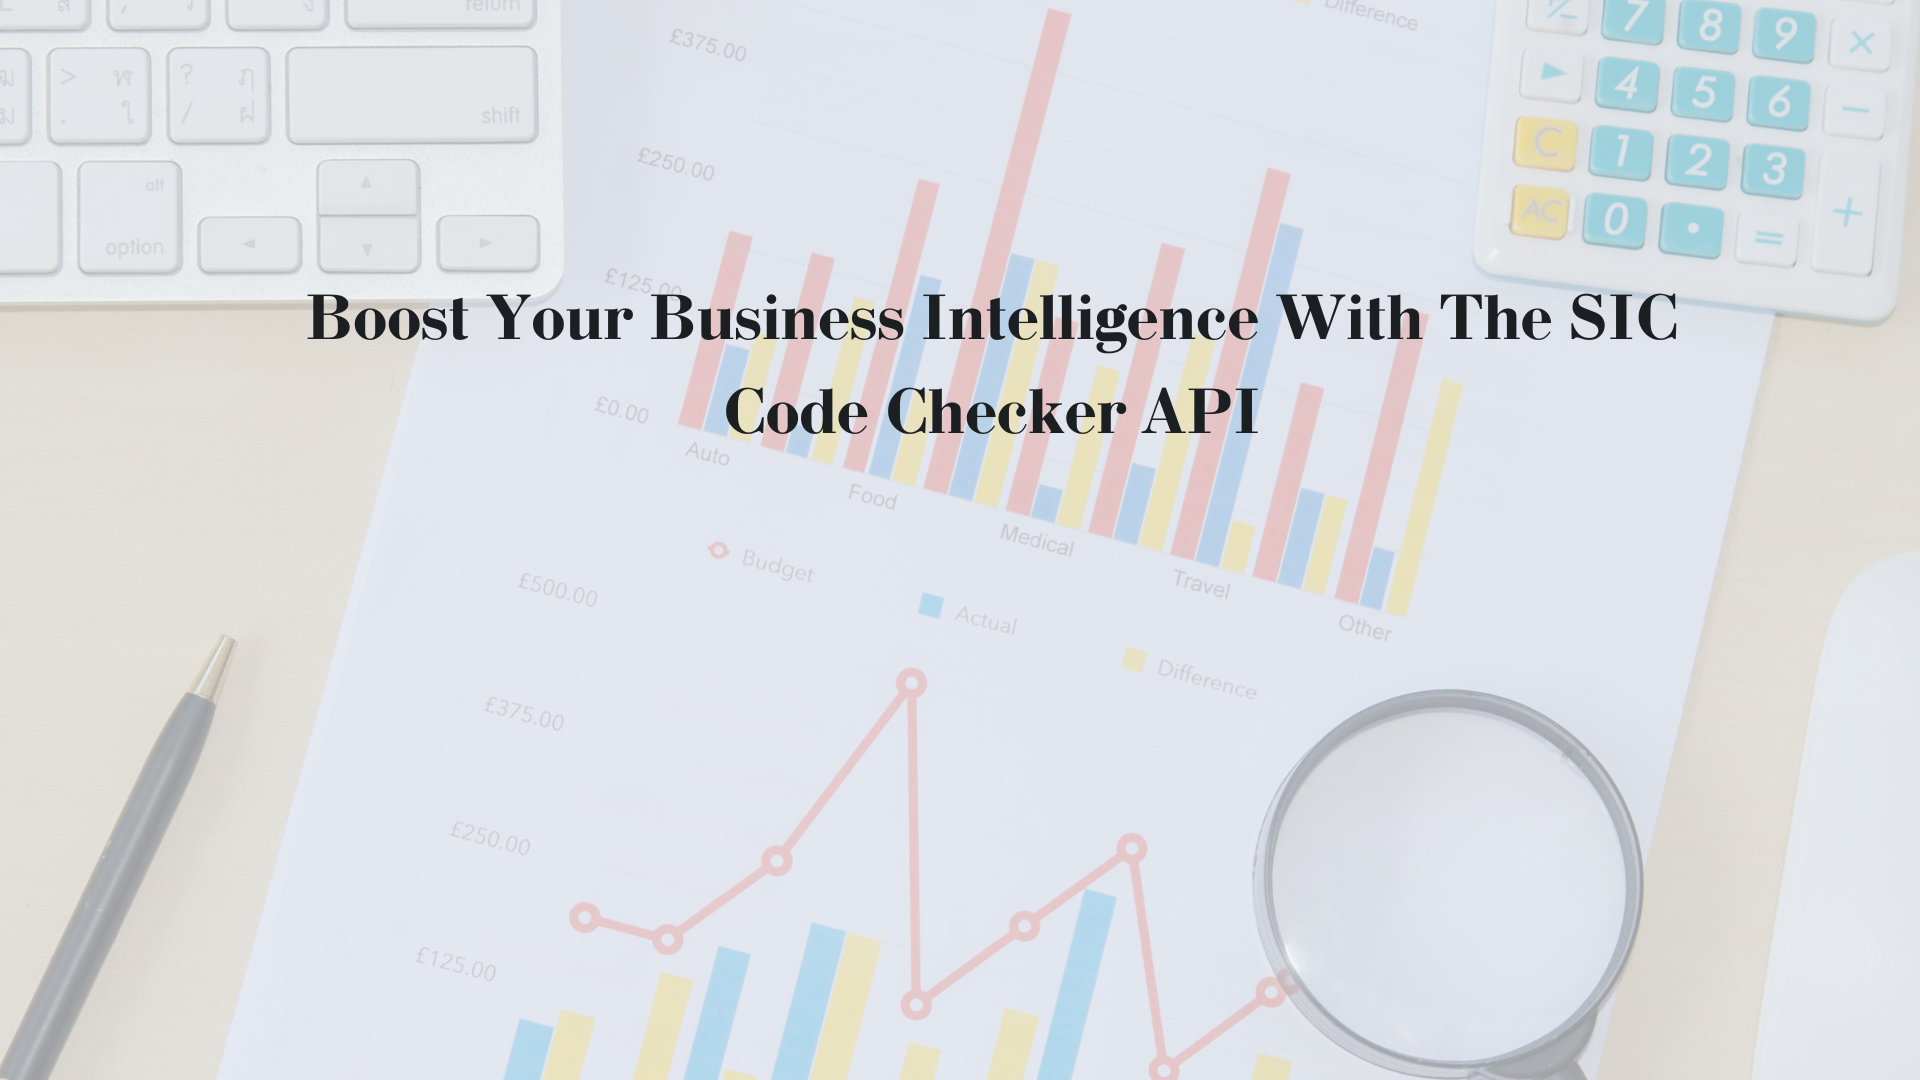 Boost Your Business Intelligence With The SIC Code Checker API